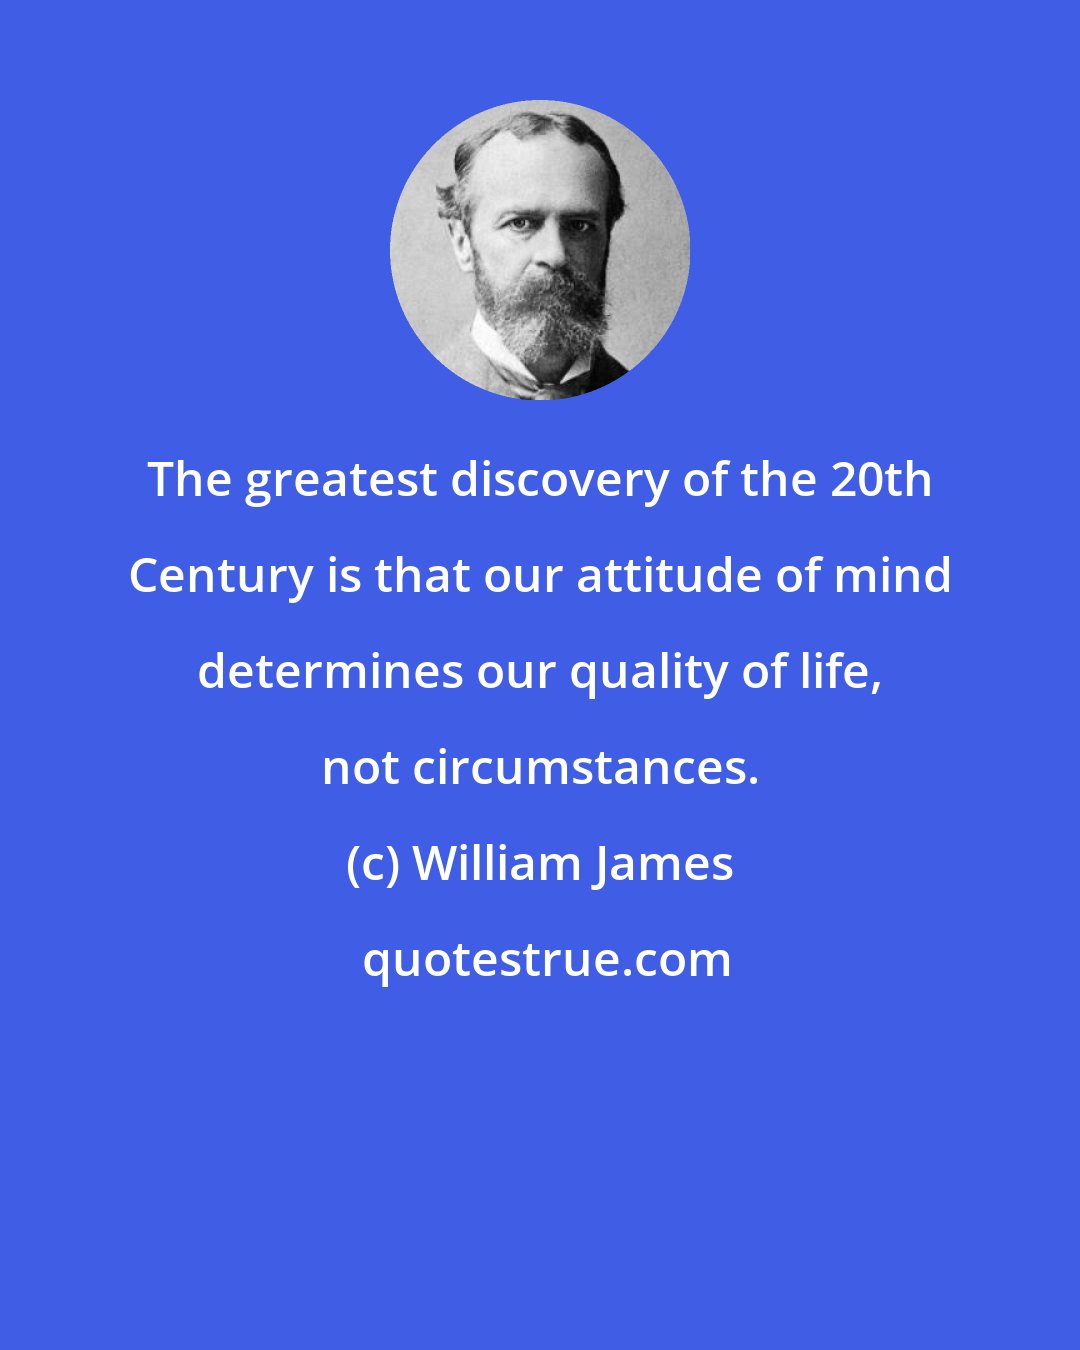 William James: The greatest discovery of the 20th Century is that our attitude of mind determines our quality of life, not circumstances.